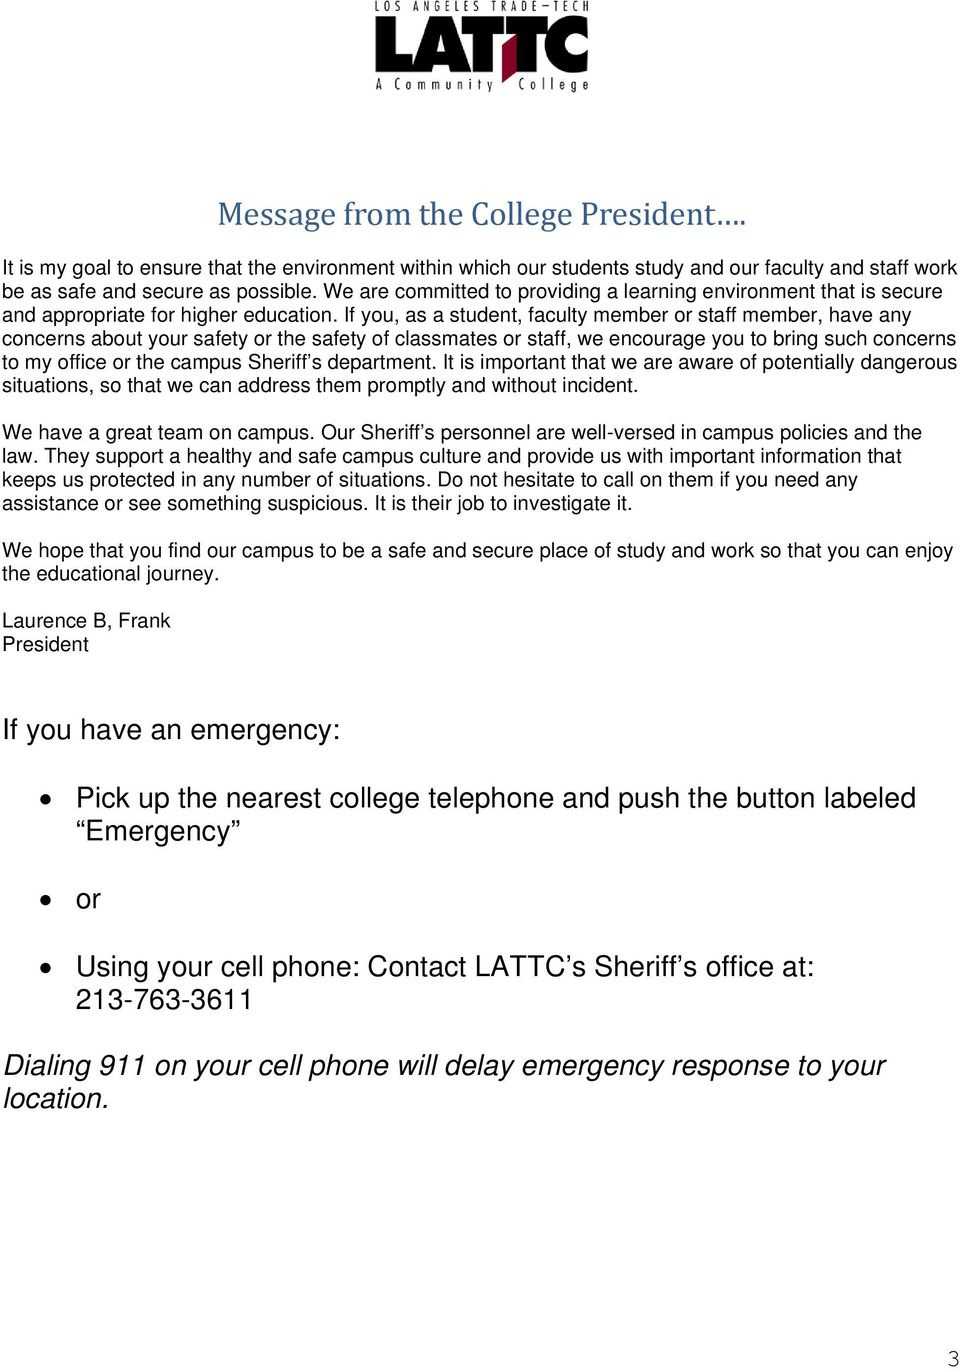 If you, as a student, faculty member or staff member, have any concerns about your safety or the safety of classmates or staff, we encourage you to bring such concerns to my office or the campus